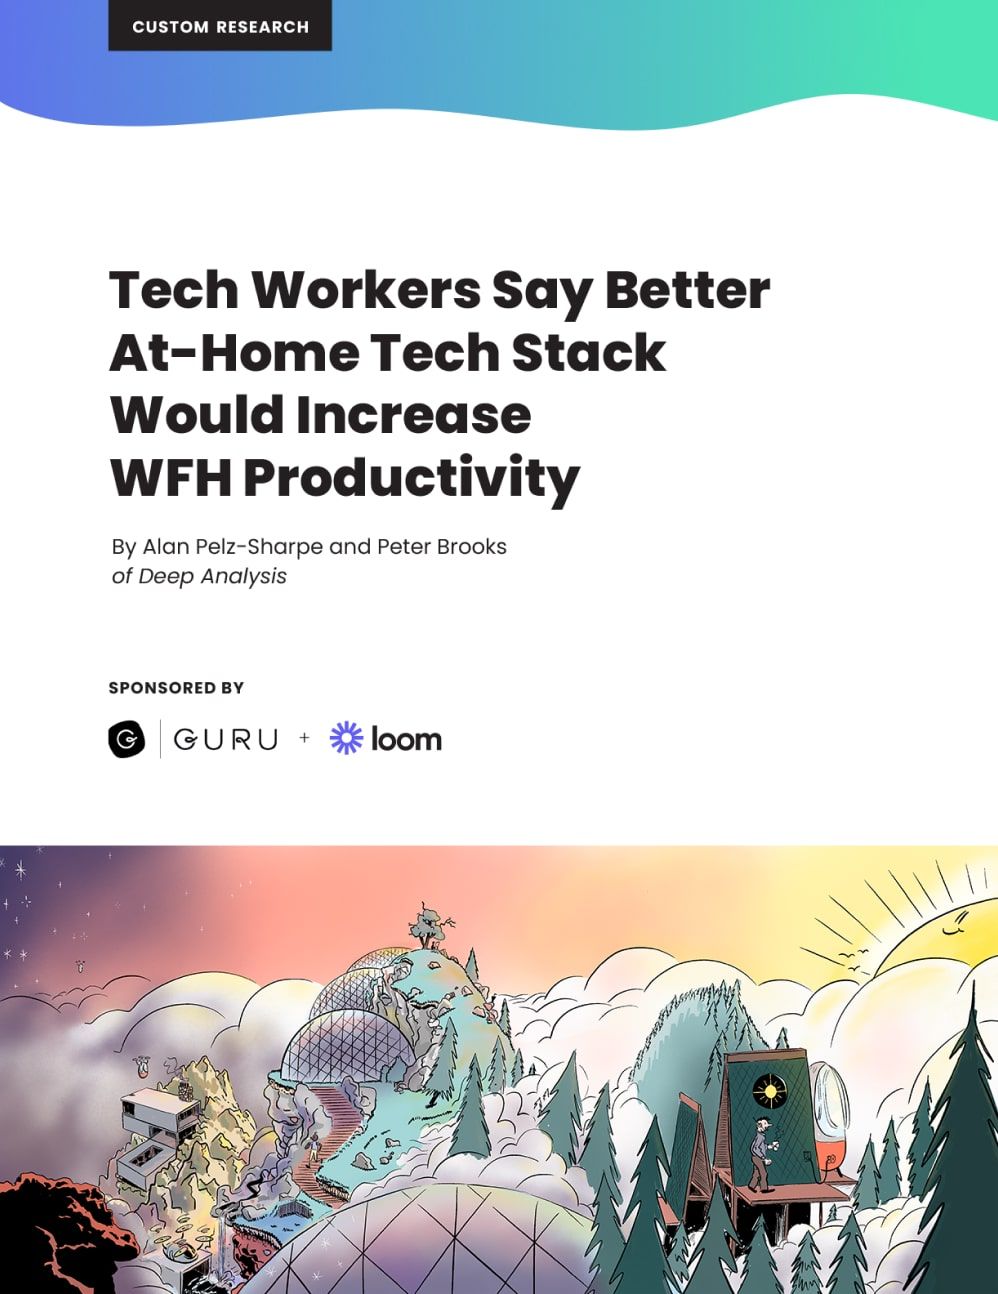 Deep Analysis book cover: Tech Workers Say Better At-Home Tech Stack Would Increase WFH Productivity by Alan-Pelz-Sharpe and Peter Brooks, by Guru and Loom